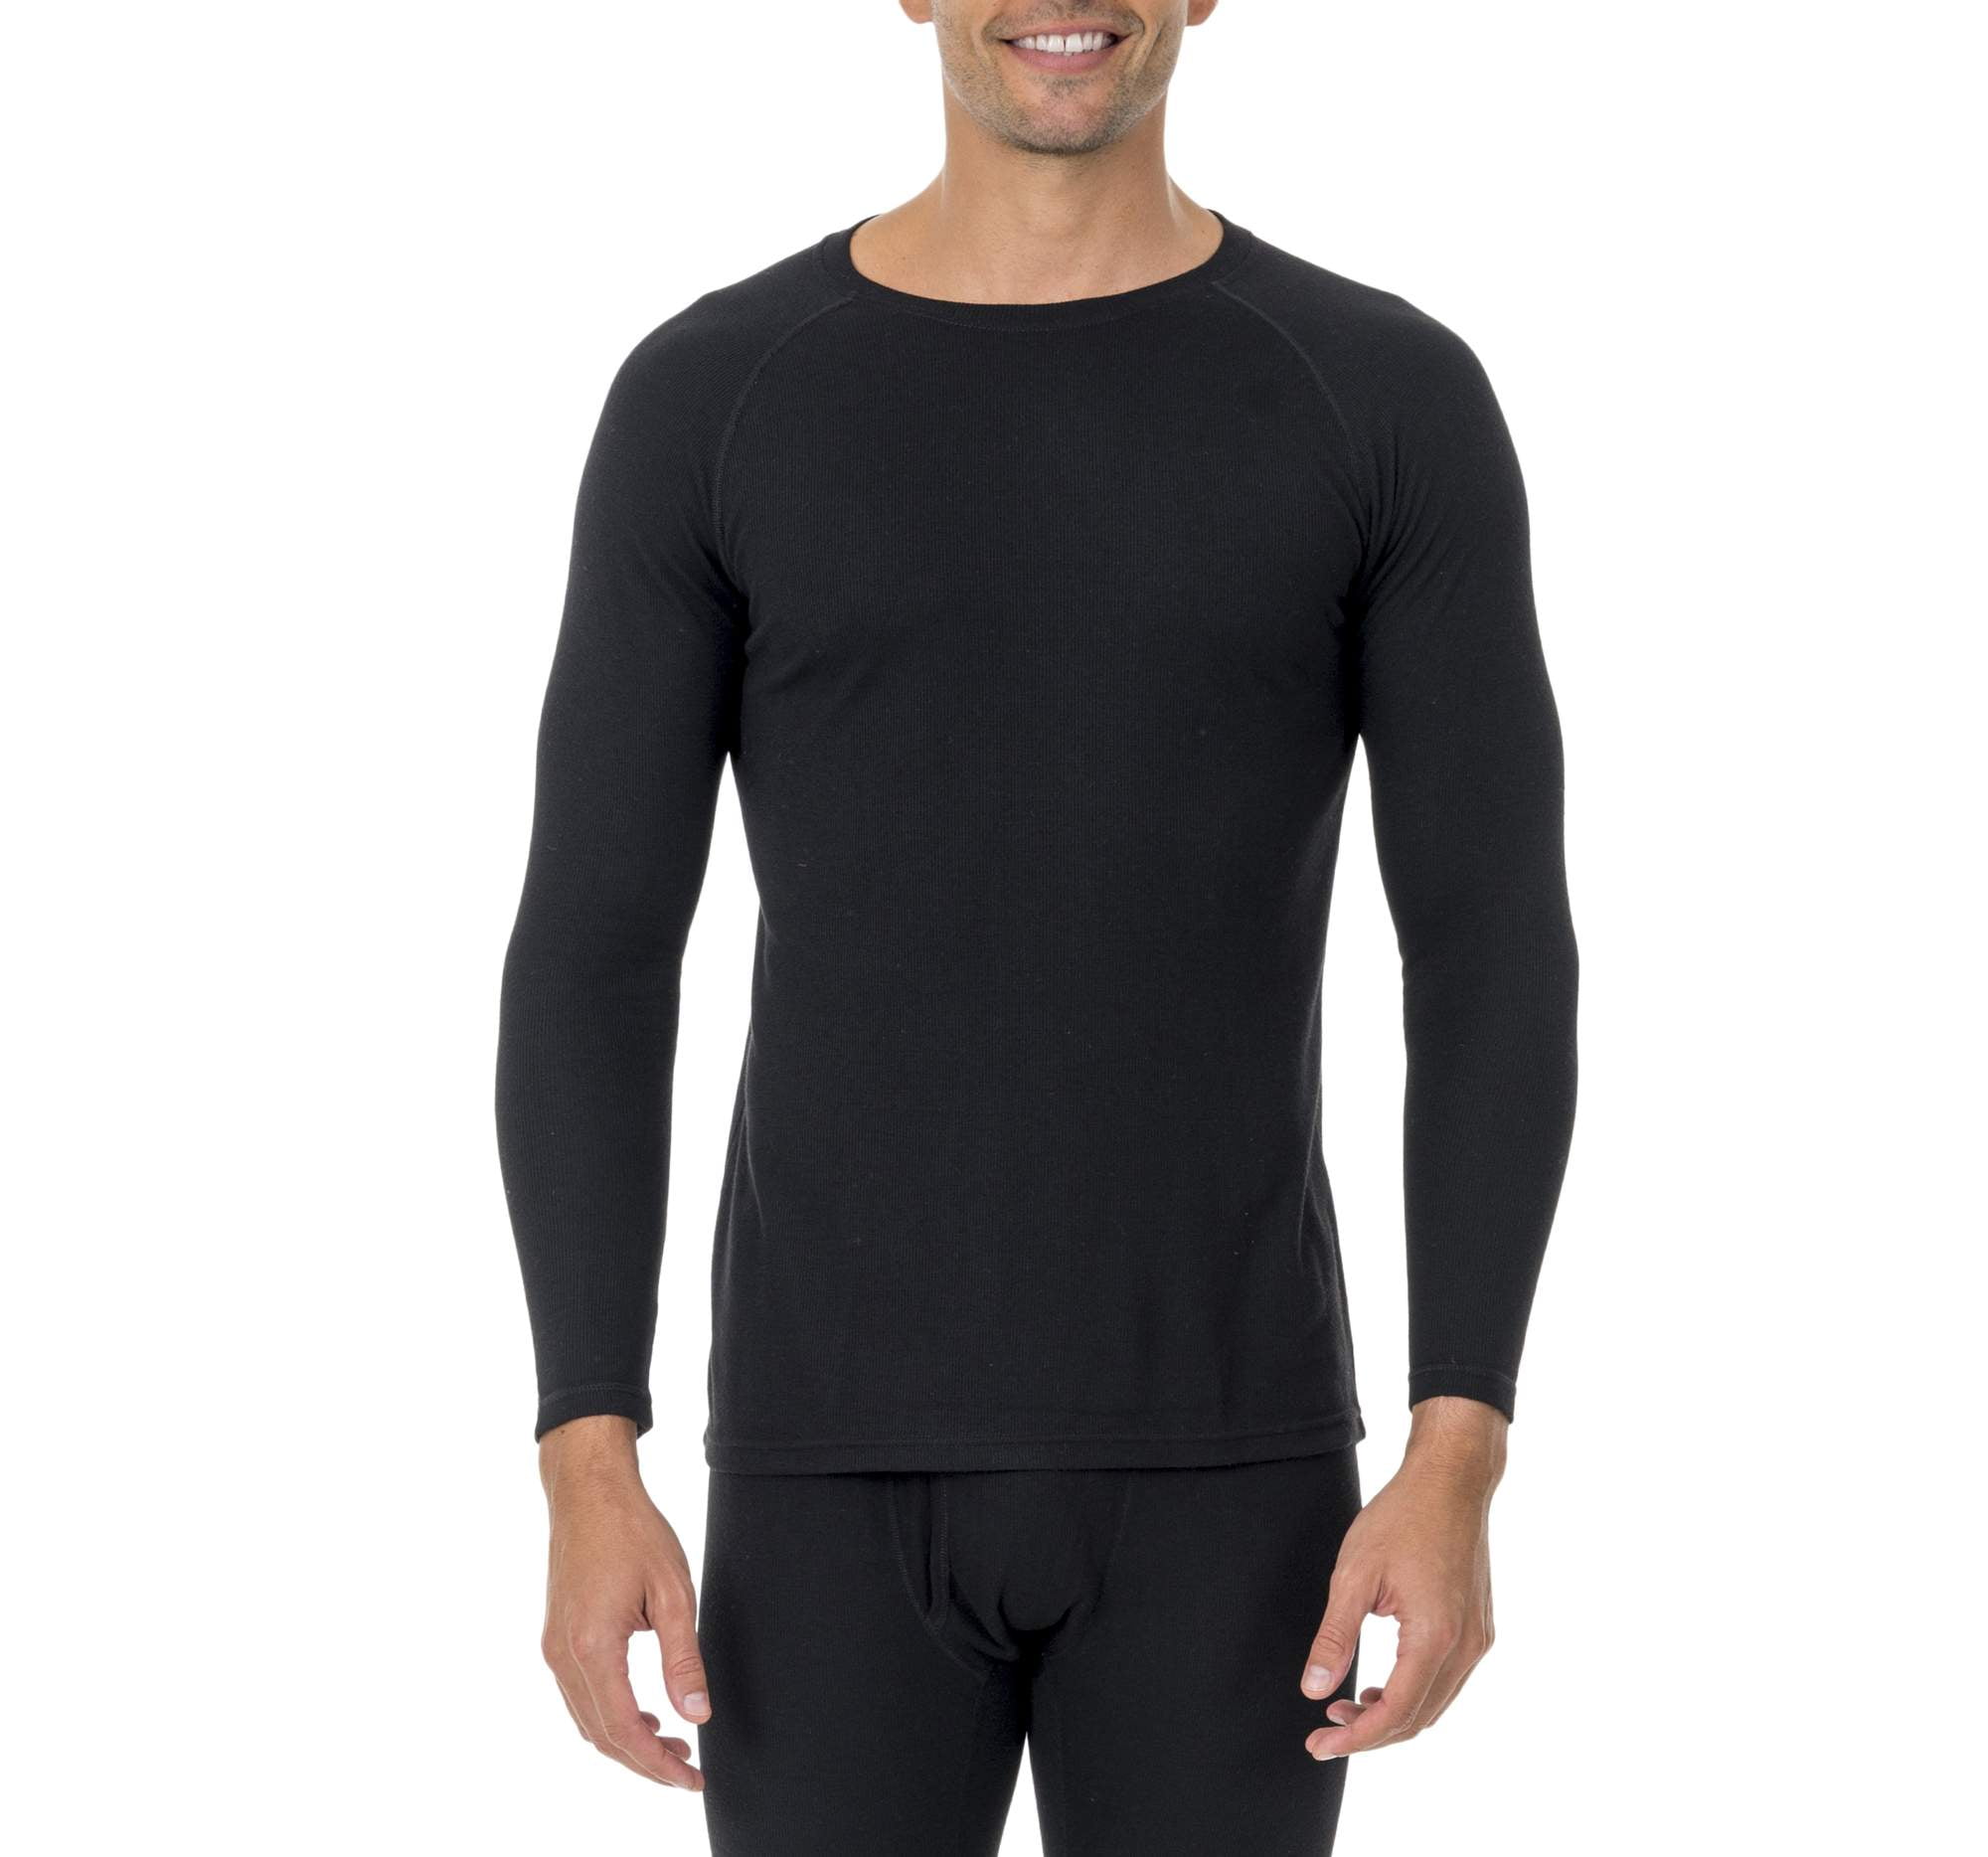 Men's Dickies Performance Layer Thermal Shirt Base Layer Size XLT Black No tag 